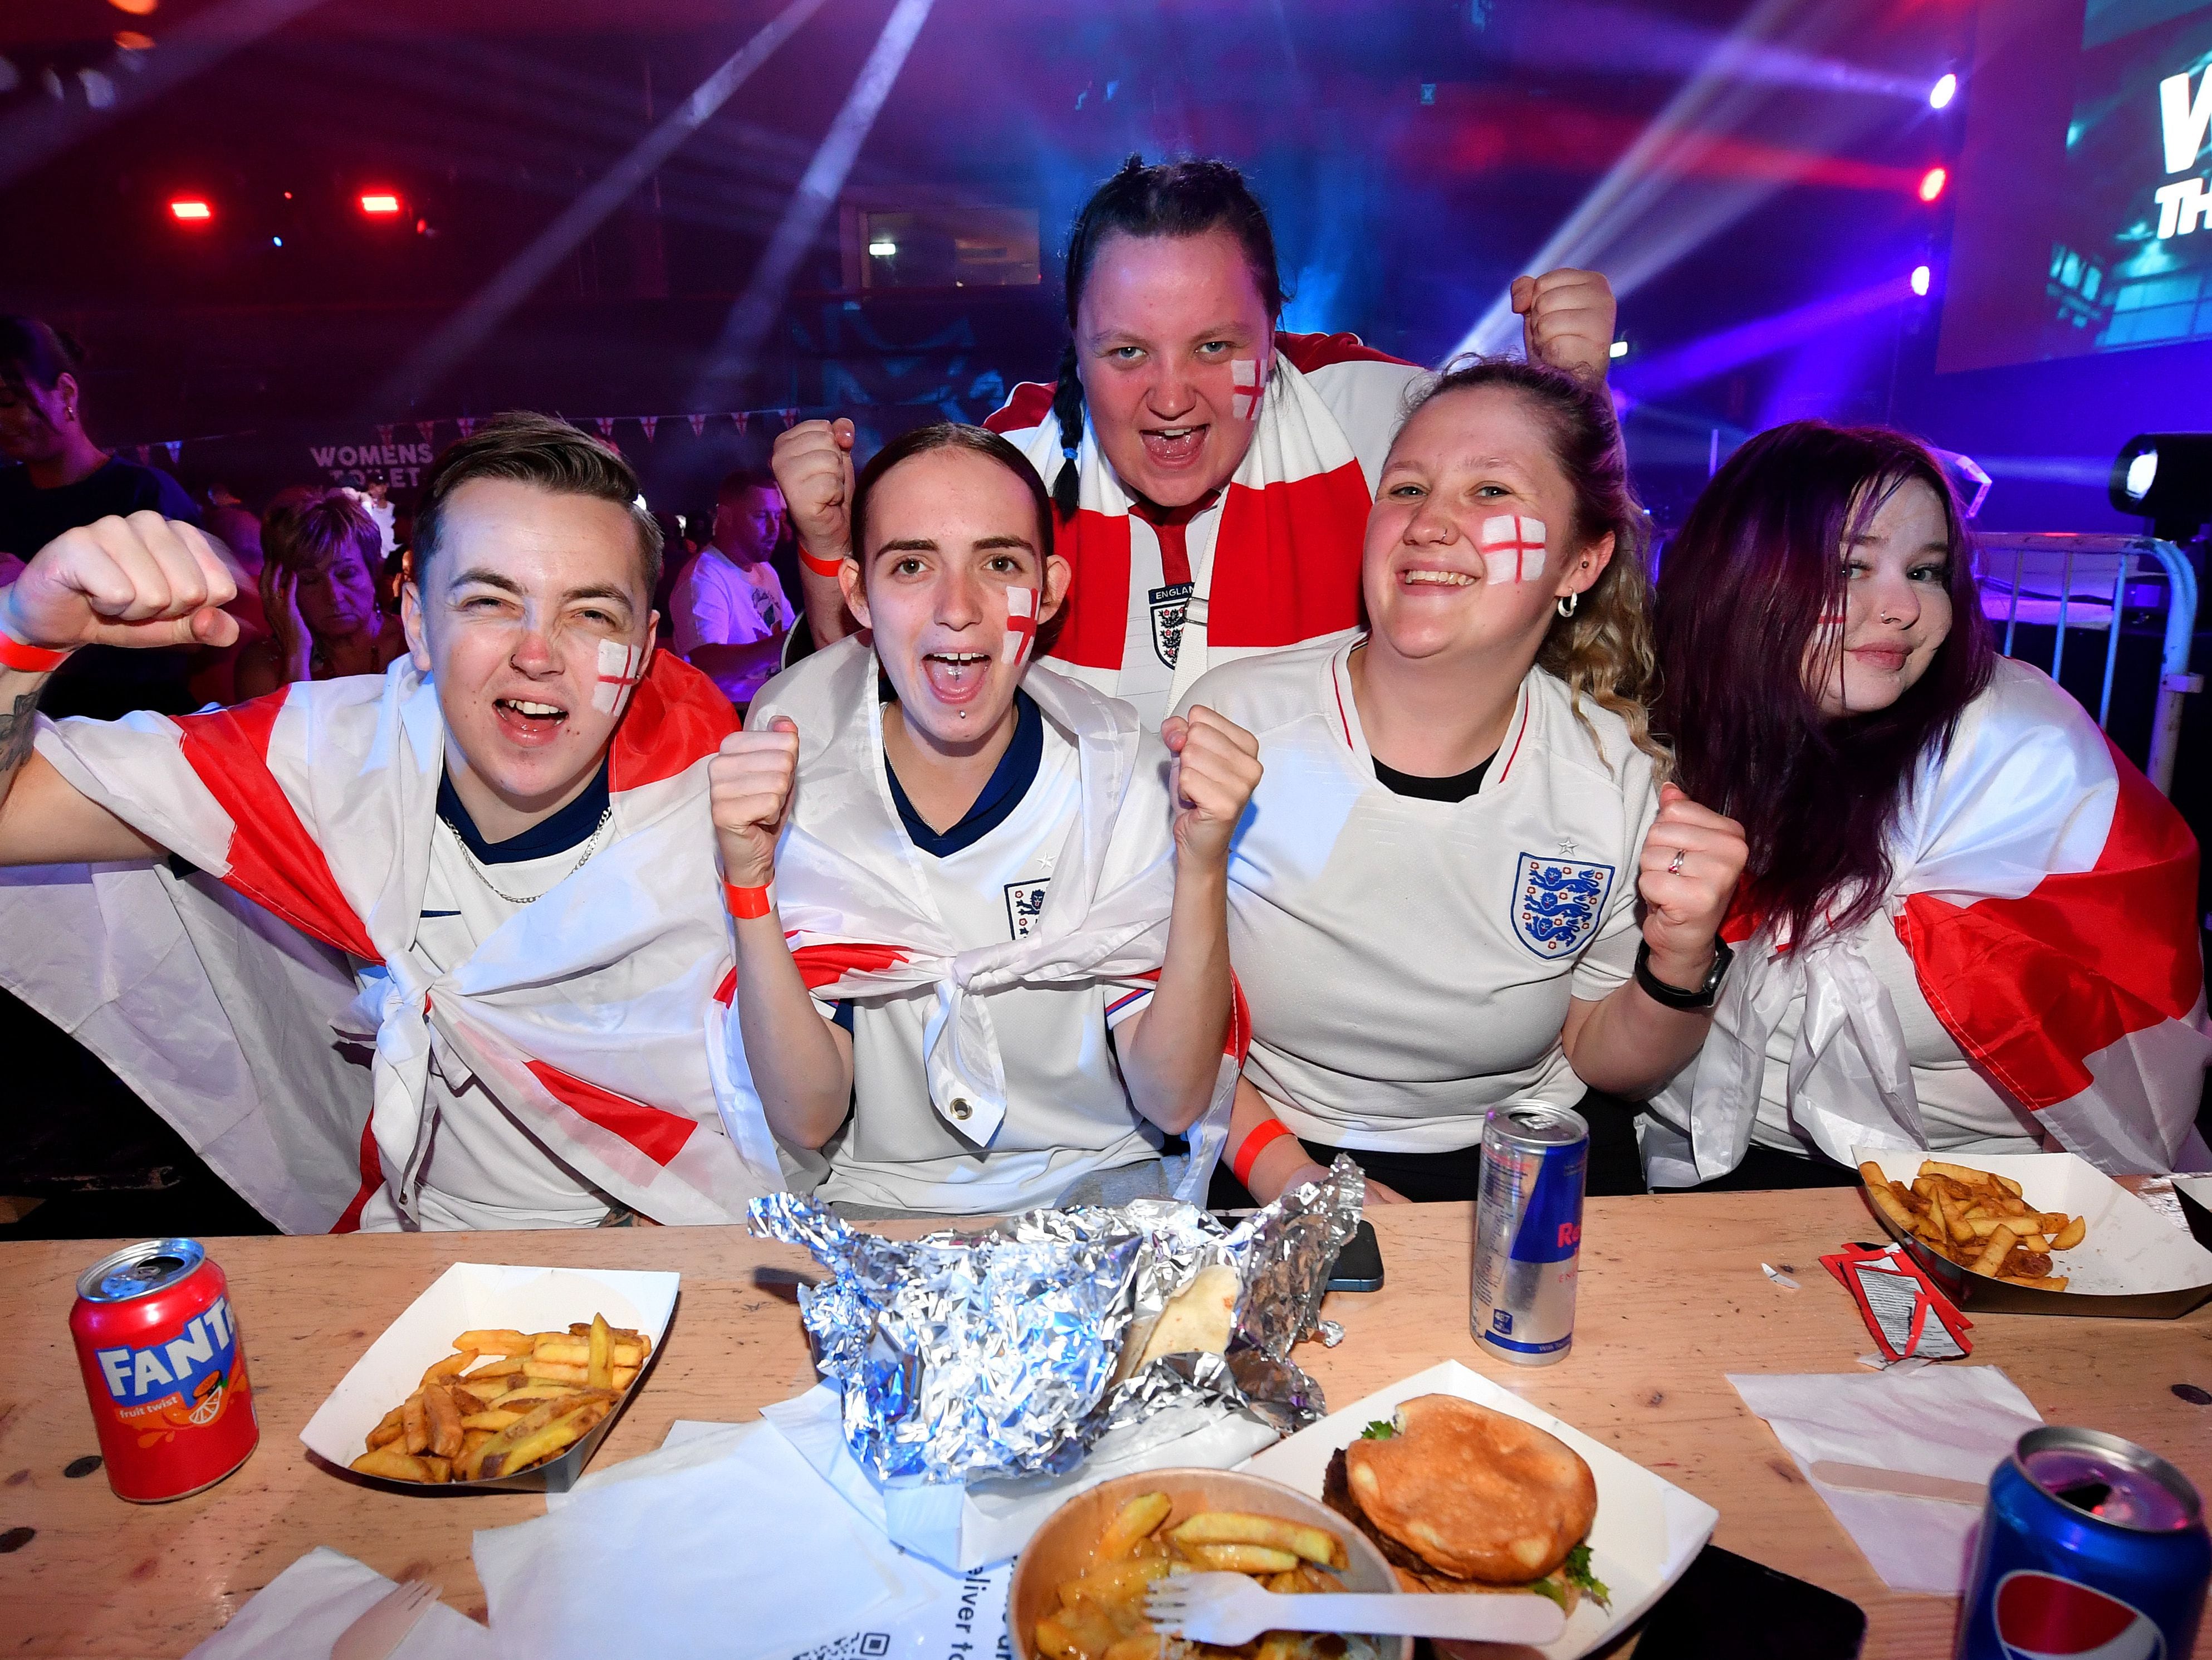 'It's exactly what you want to see!' Venue owner proud of sell-out Euros event despite England loss